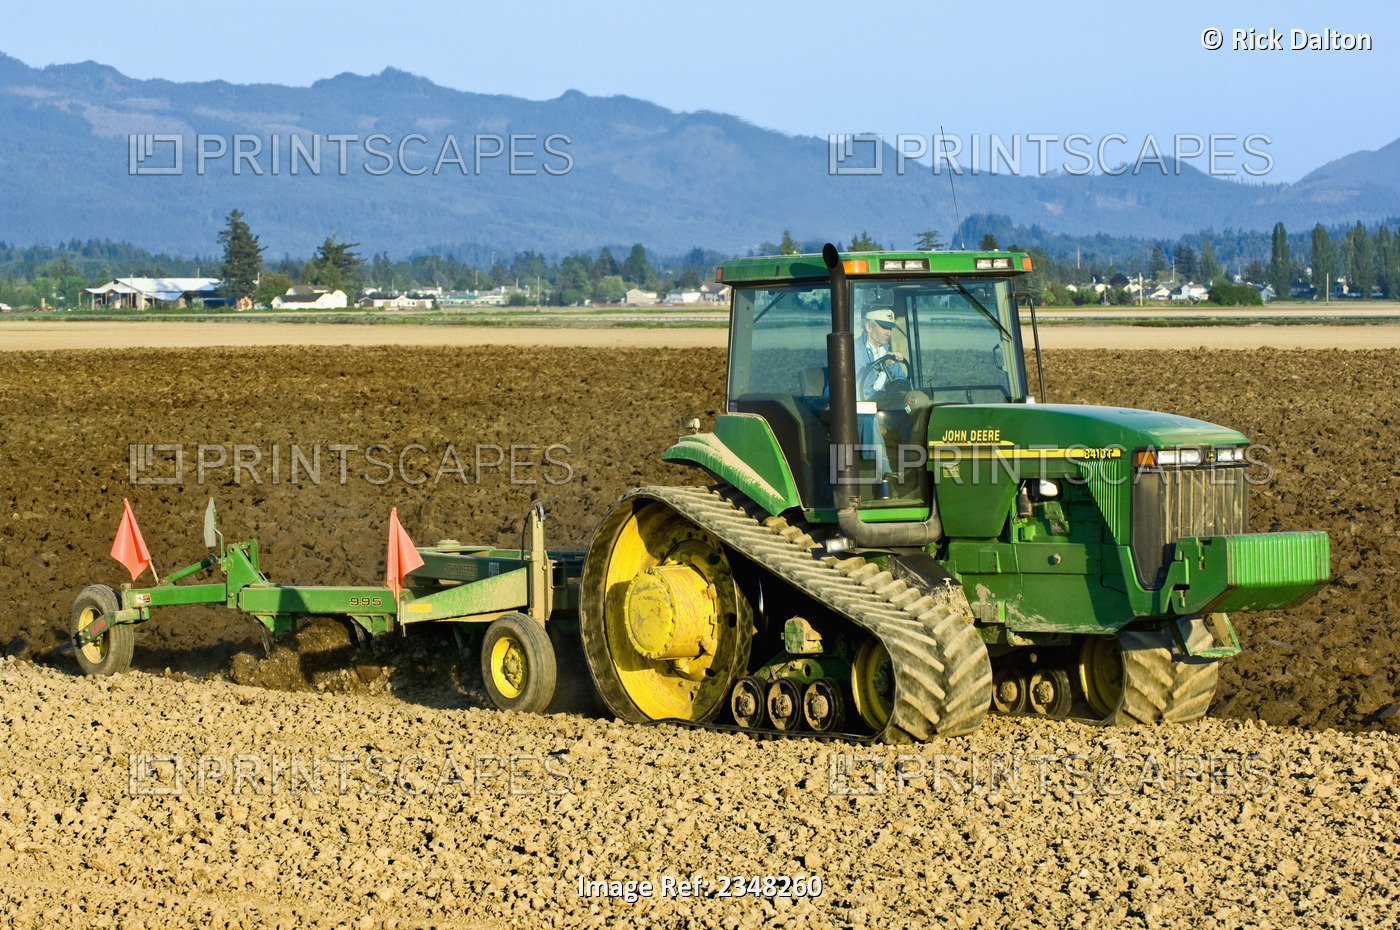 Agriculture - A John Deere tracked tractor pulling a reversible plow prepares a ...